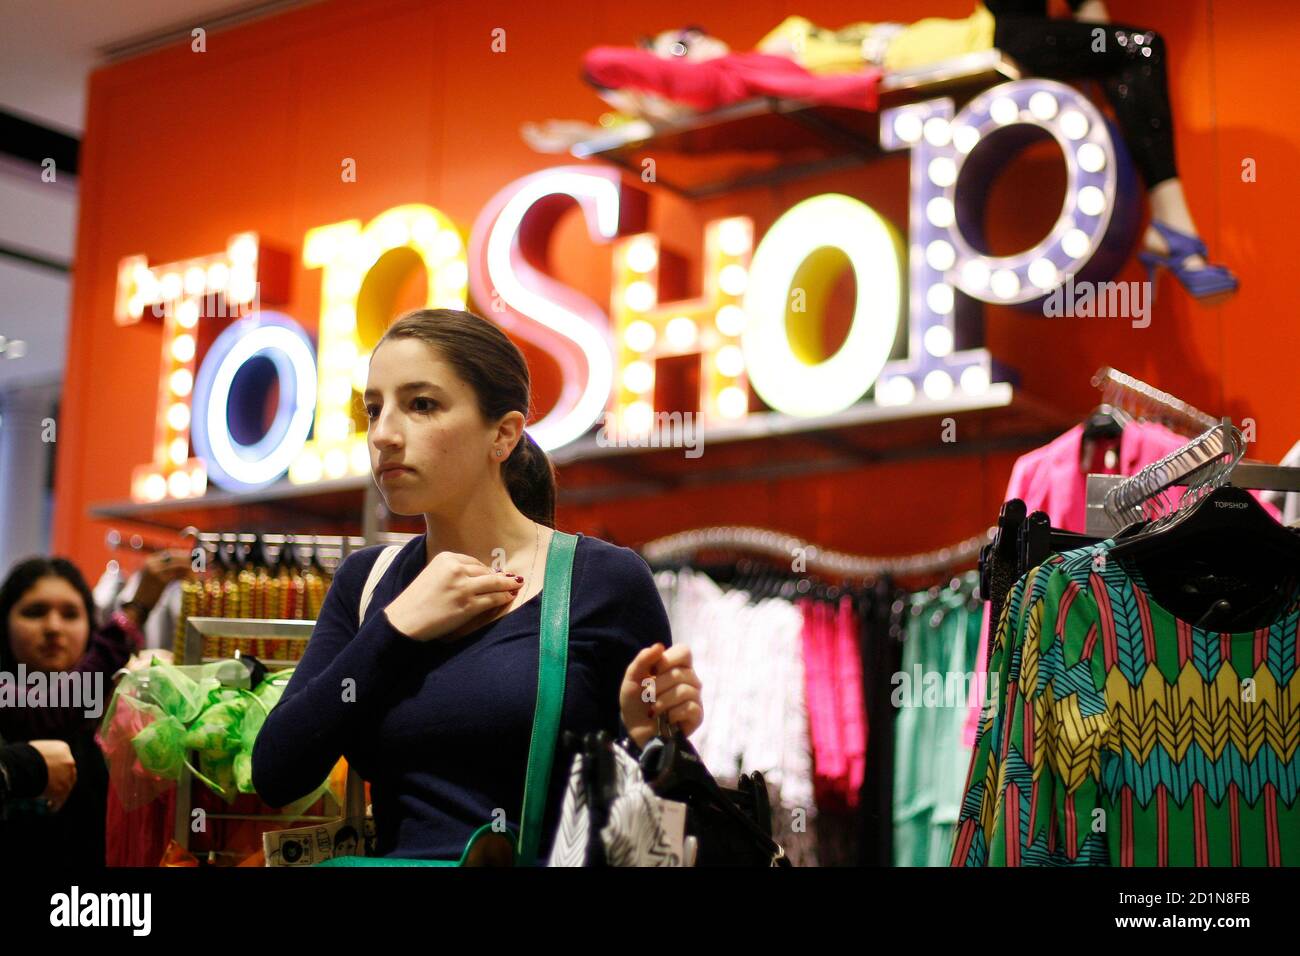 A woman looks at clothing items while shopping in the new Topshop and  Topman clothing store in New York April 2, 2009. Topshop, Britain's trendy  mass-market fashion retailer, could eventually have about